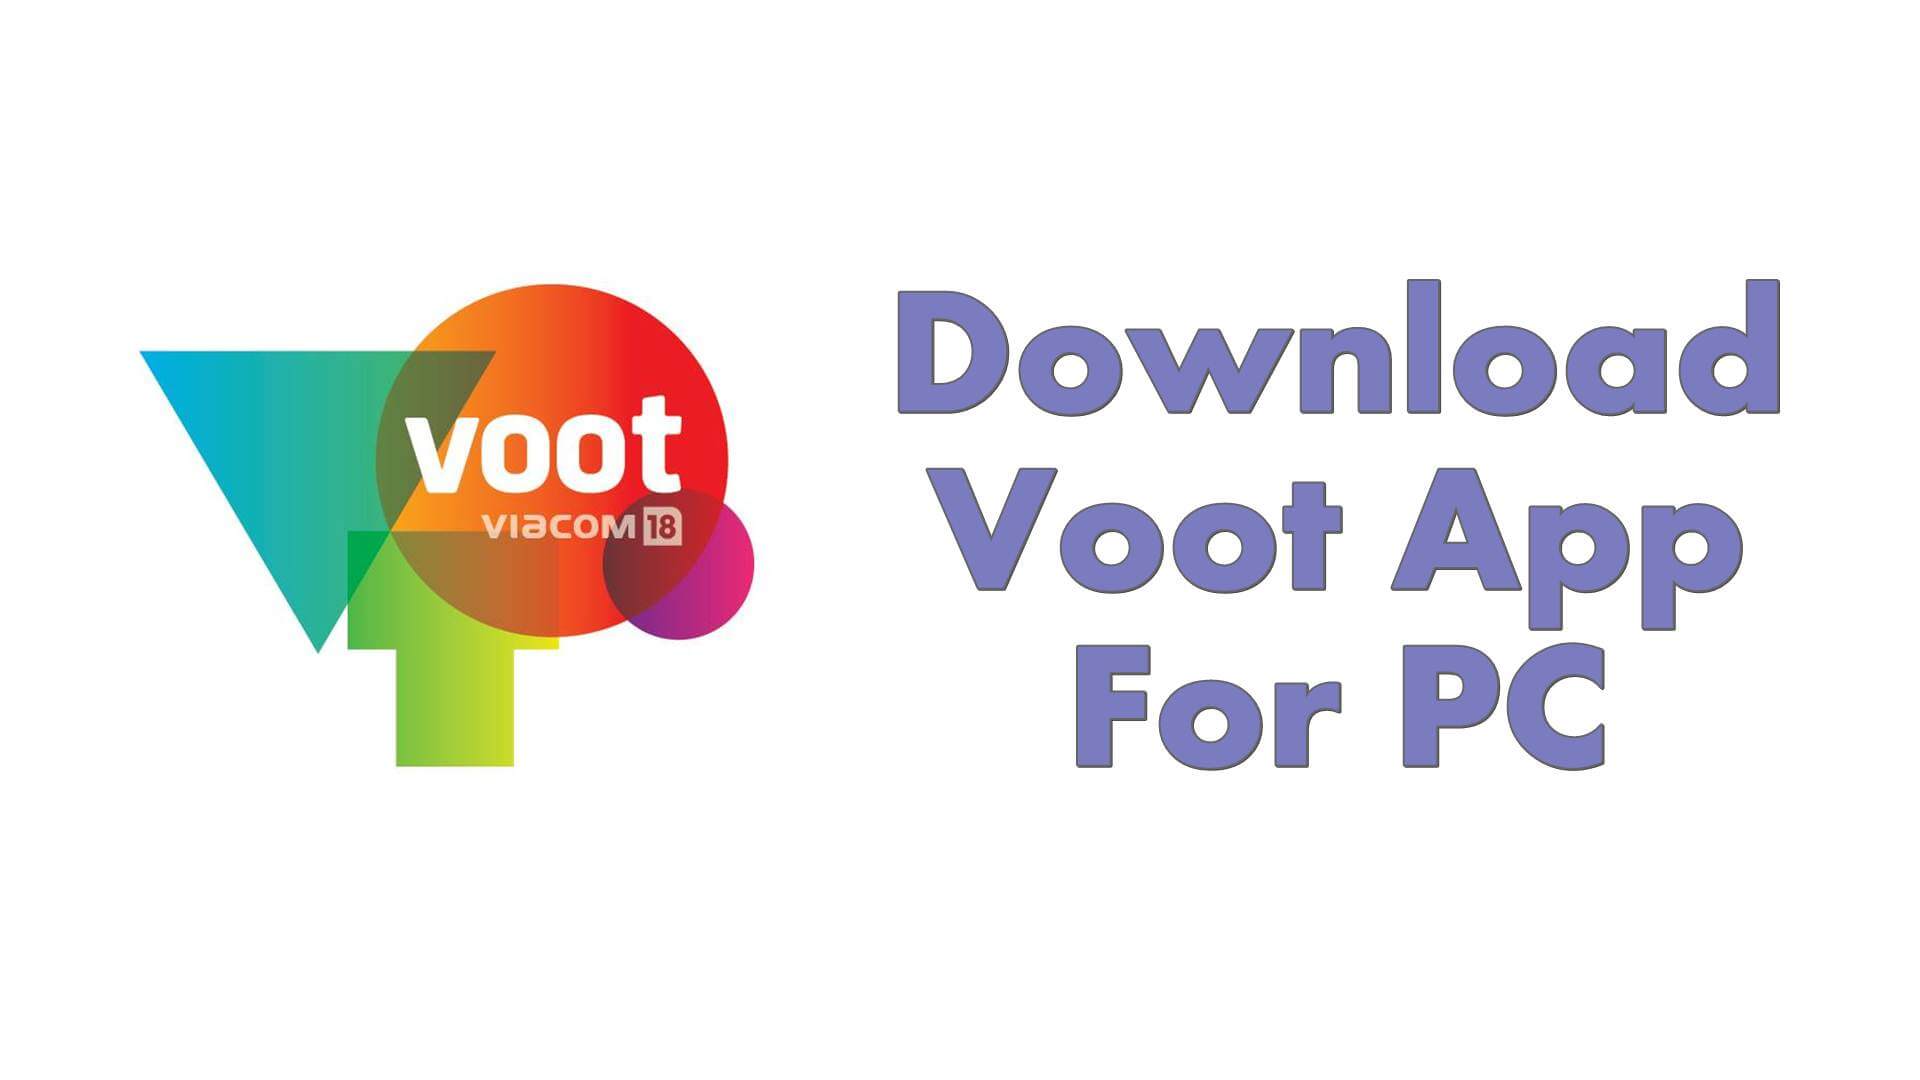 Install the Voot app on Android and PC